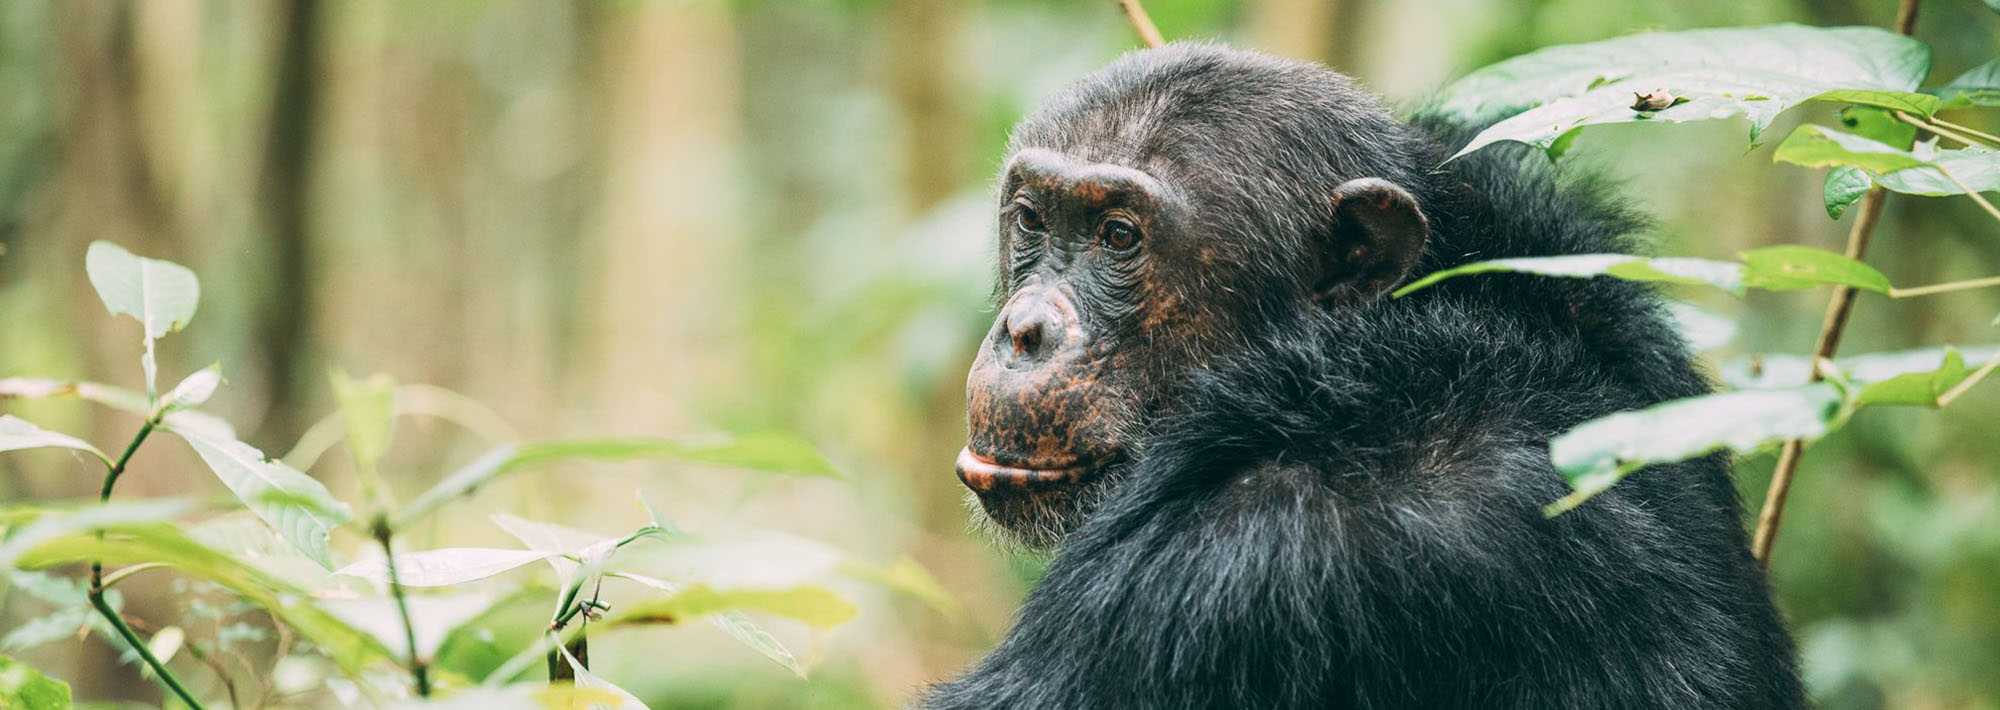 Africa's Great Apes